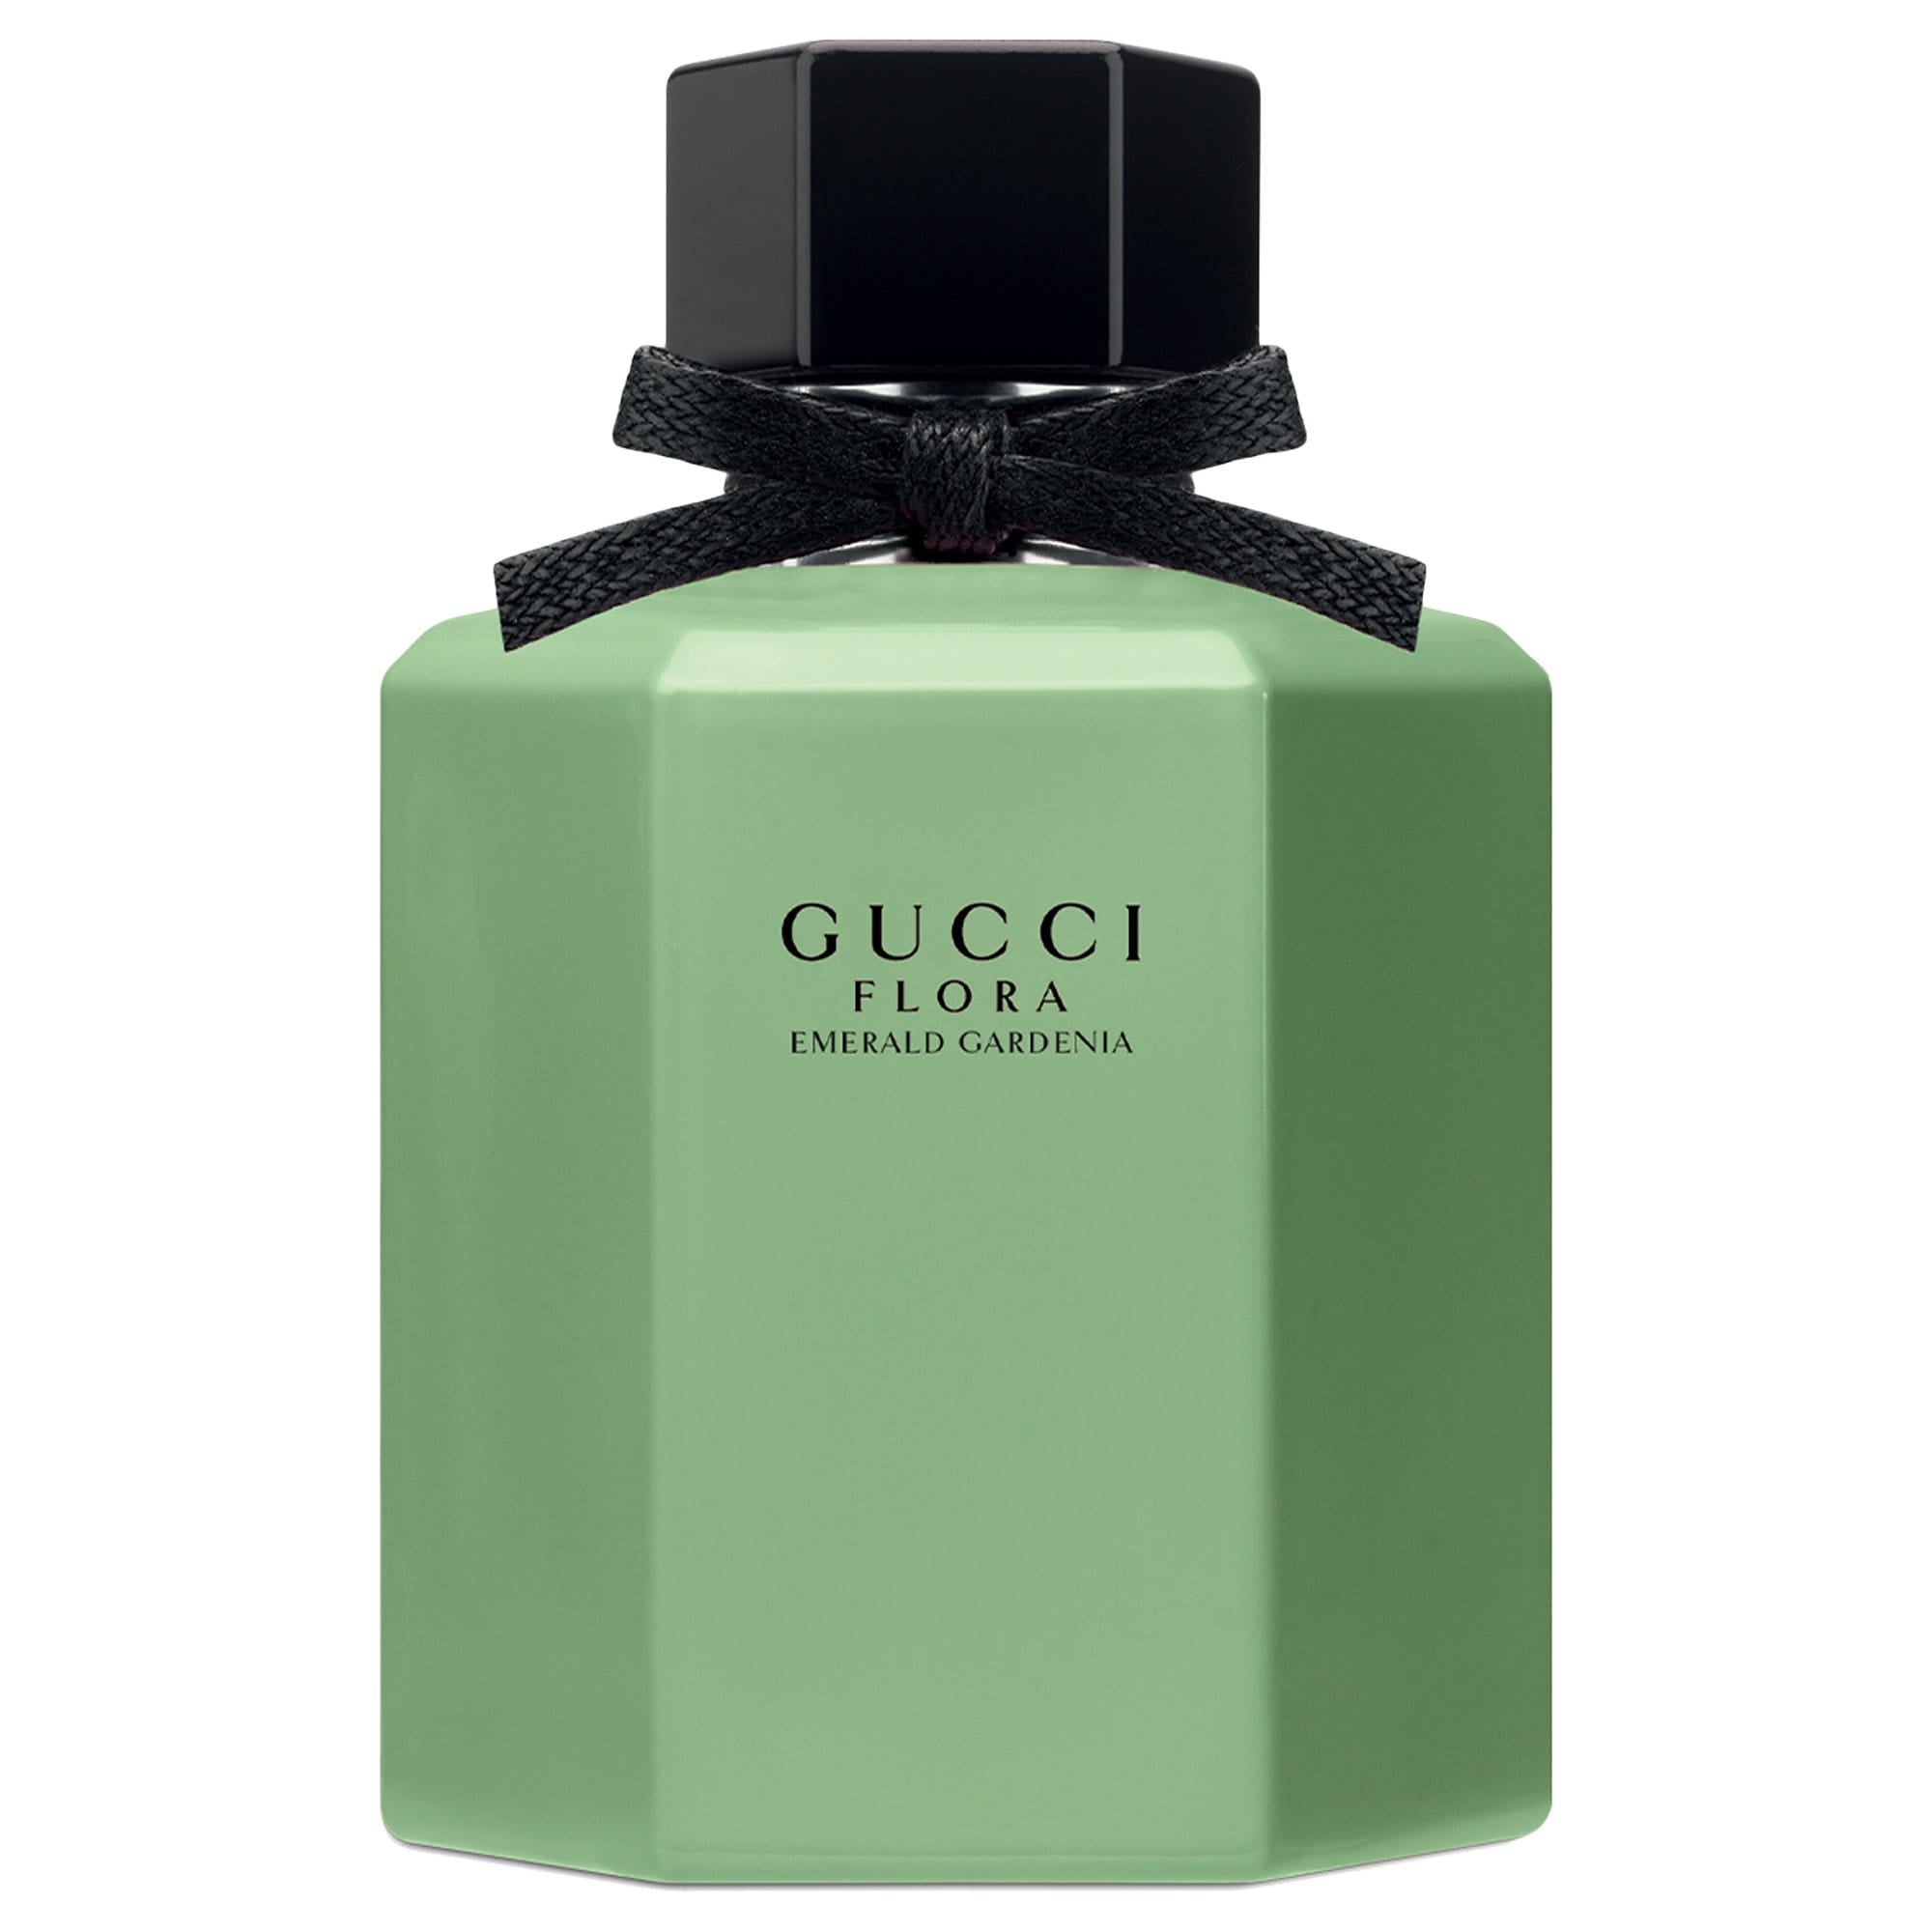 Review, Roundup, Fragrance, Trends, 2019, 2020: Best New Fragrances and Perfumes, Gucci, Yves Saint Laurent, Jo Malone London, Chloe, Marc Jacobs